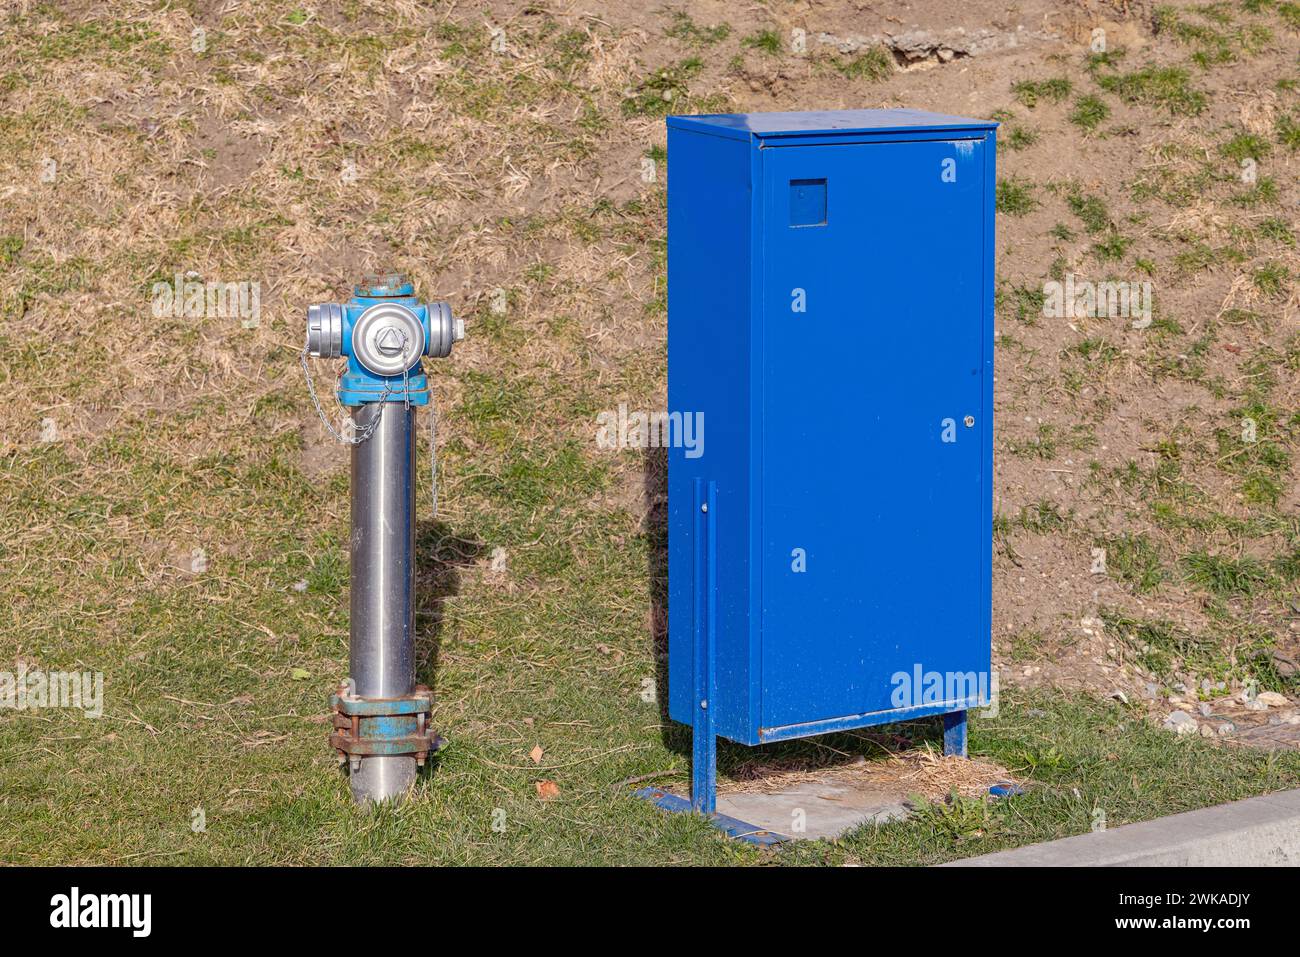 Firefighters Equipment Blue Box and Water Hydrant Pipe Stock Photo